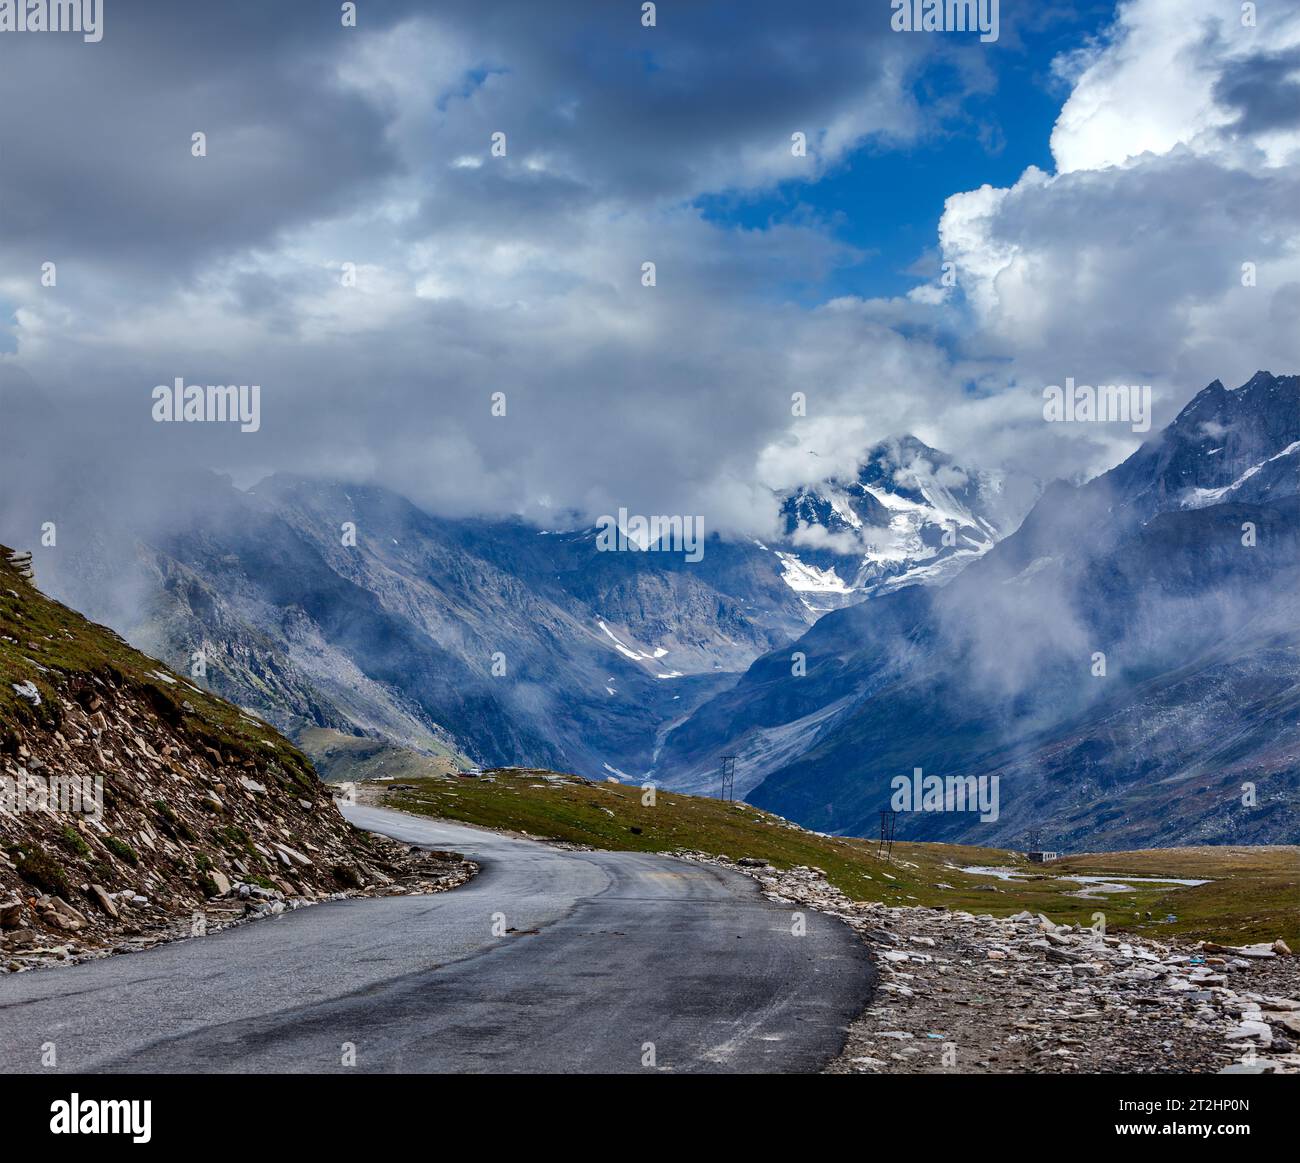 Road in Himalayas Stock Photo